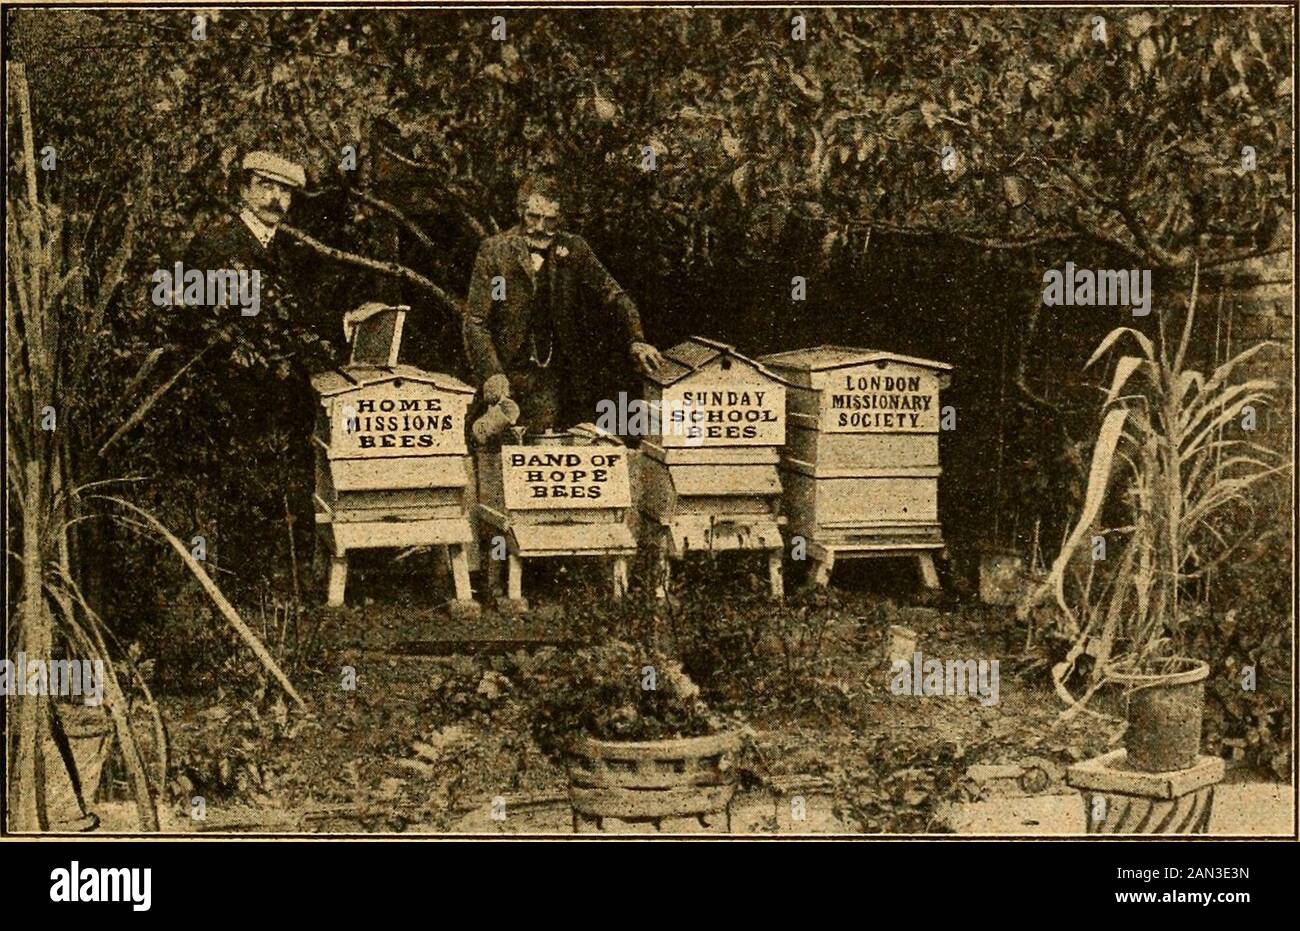 British bee journal & bee-keepers adviser . fore theseason ended 109 1-lb. sections were takenfrom them. This will, I think, not beaccounted as a bad beginning. In the fall of the same year, Mr. Sim-mons had the bees of three straw skepsgiven to him for the trouble of driving,which was successfully done ; the three lots foundation, etc., together with fourteennew section racks. The honey sold realised£11 2s. Provided the coming bee-seasonproves at all favourable, theee Coggeshallhives may be reasonably expected to yieldexcellent financial results in the courseof the present year. But should th Stock Photo